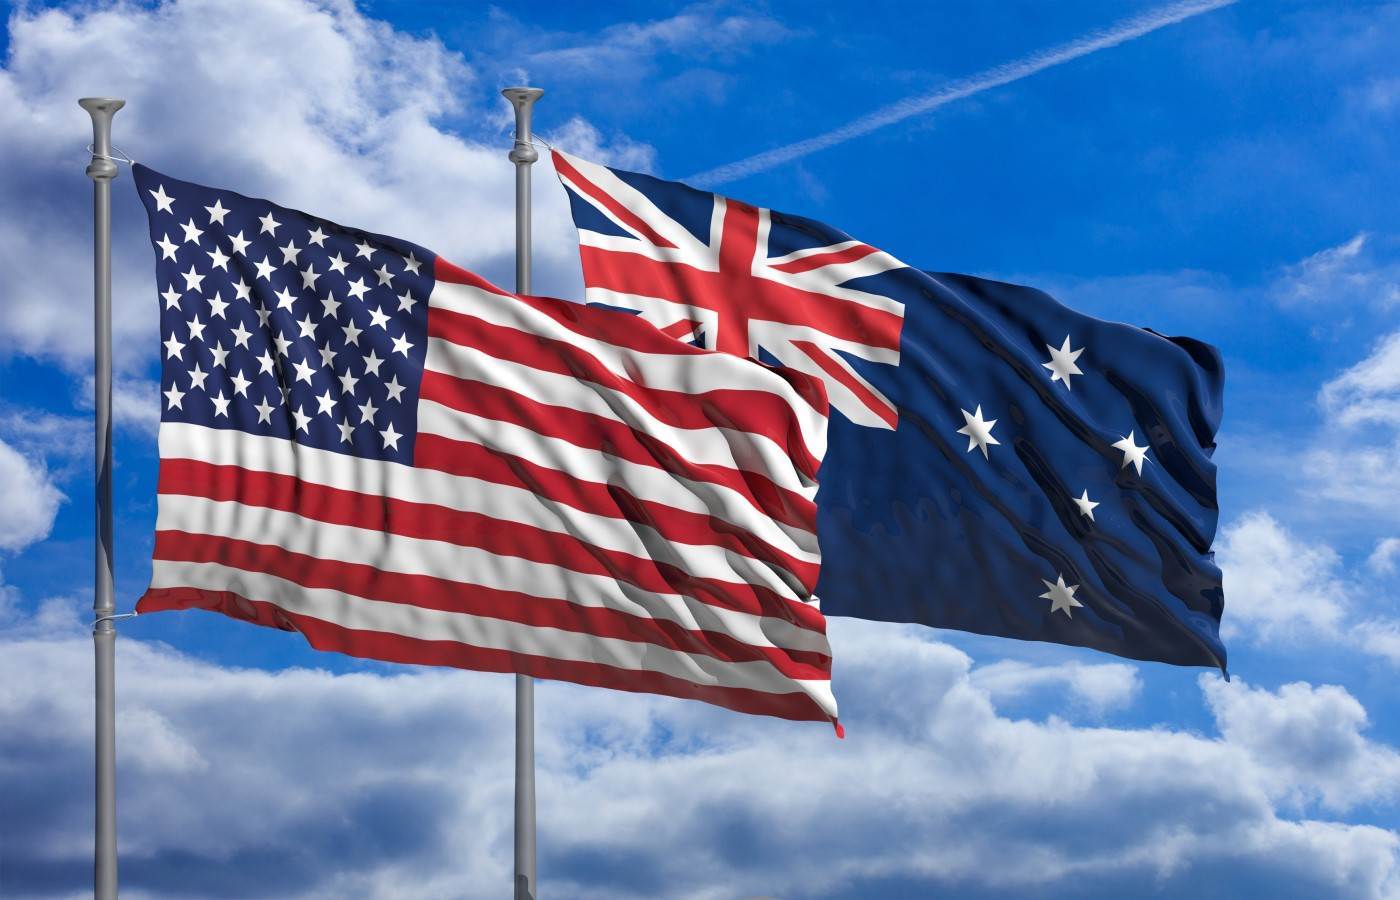 US-Aust leader dialogue covers AI, space, cyber security